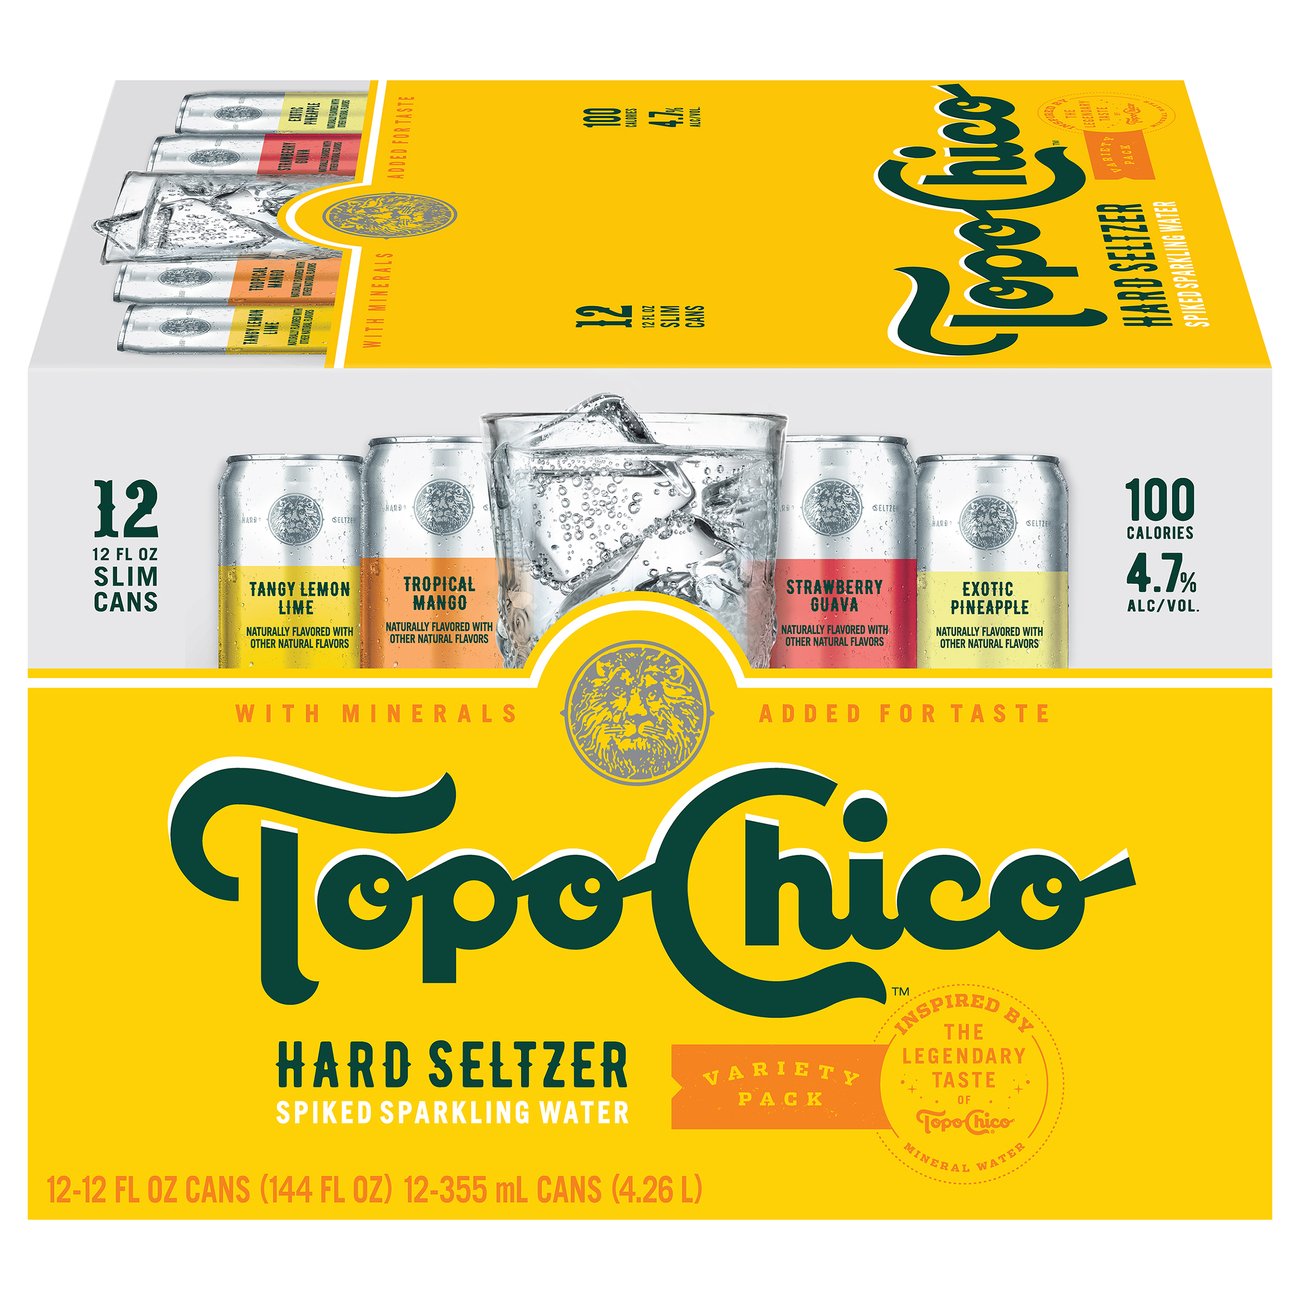 Topo Chico Hard Seltzer Variety Pack 24/12 oz cans - Beverages2u